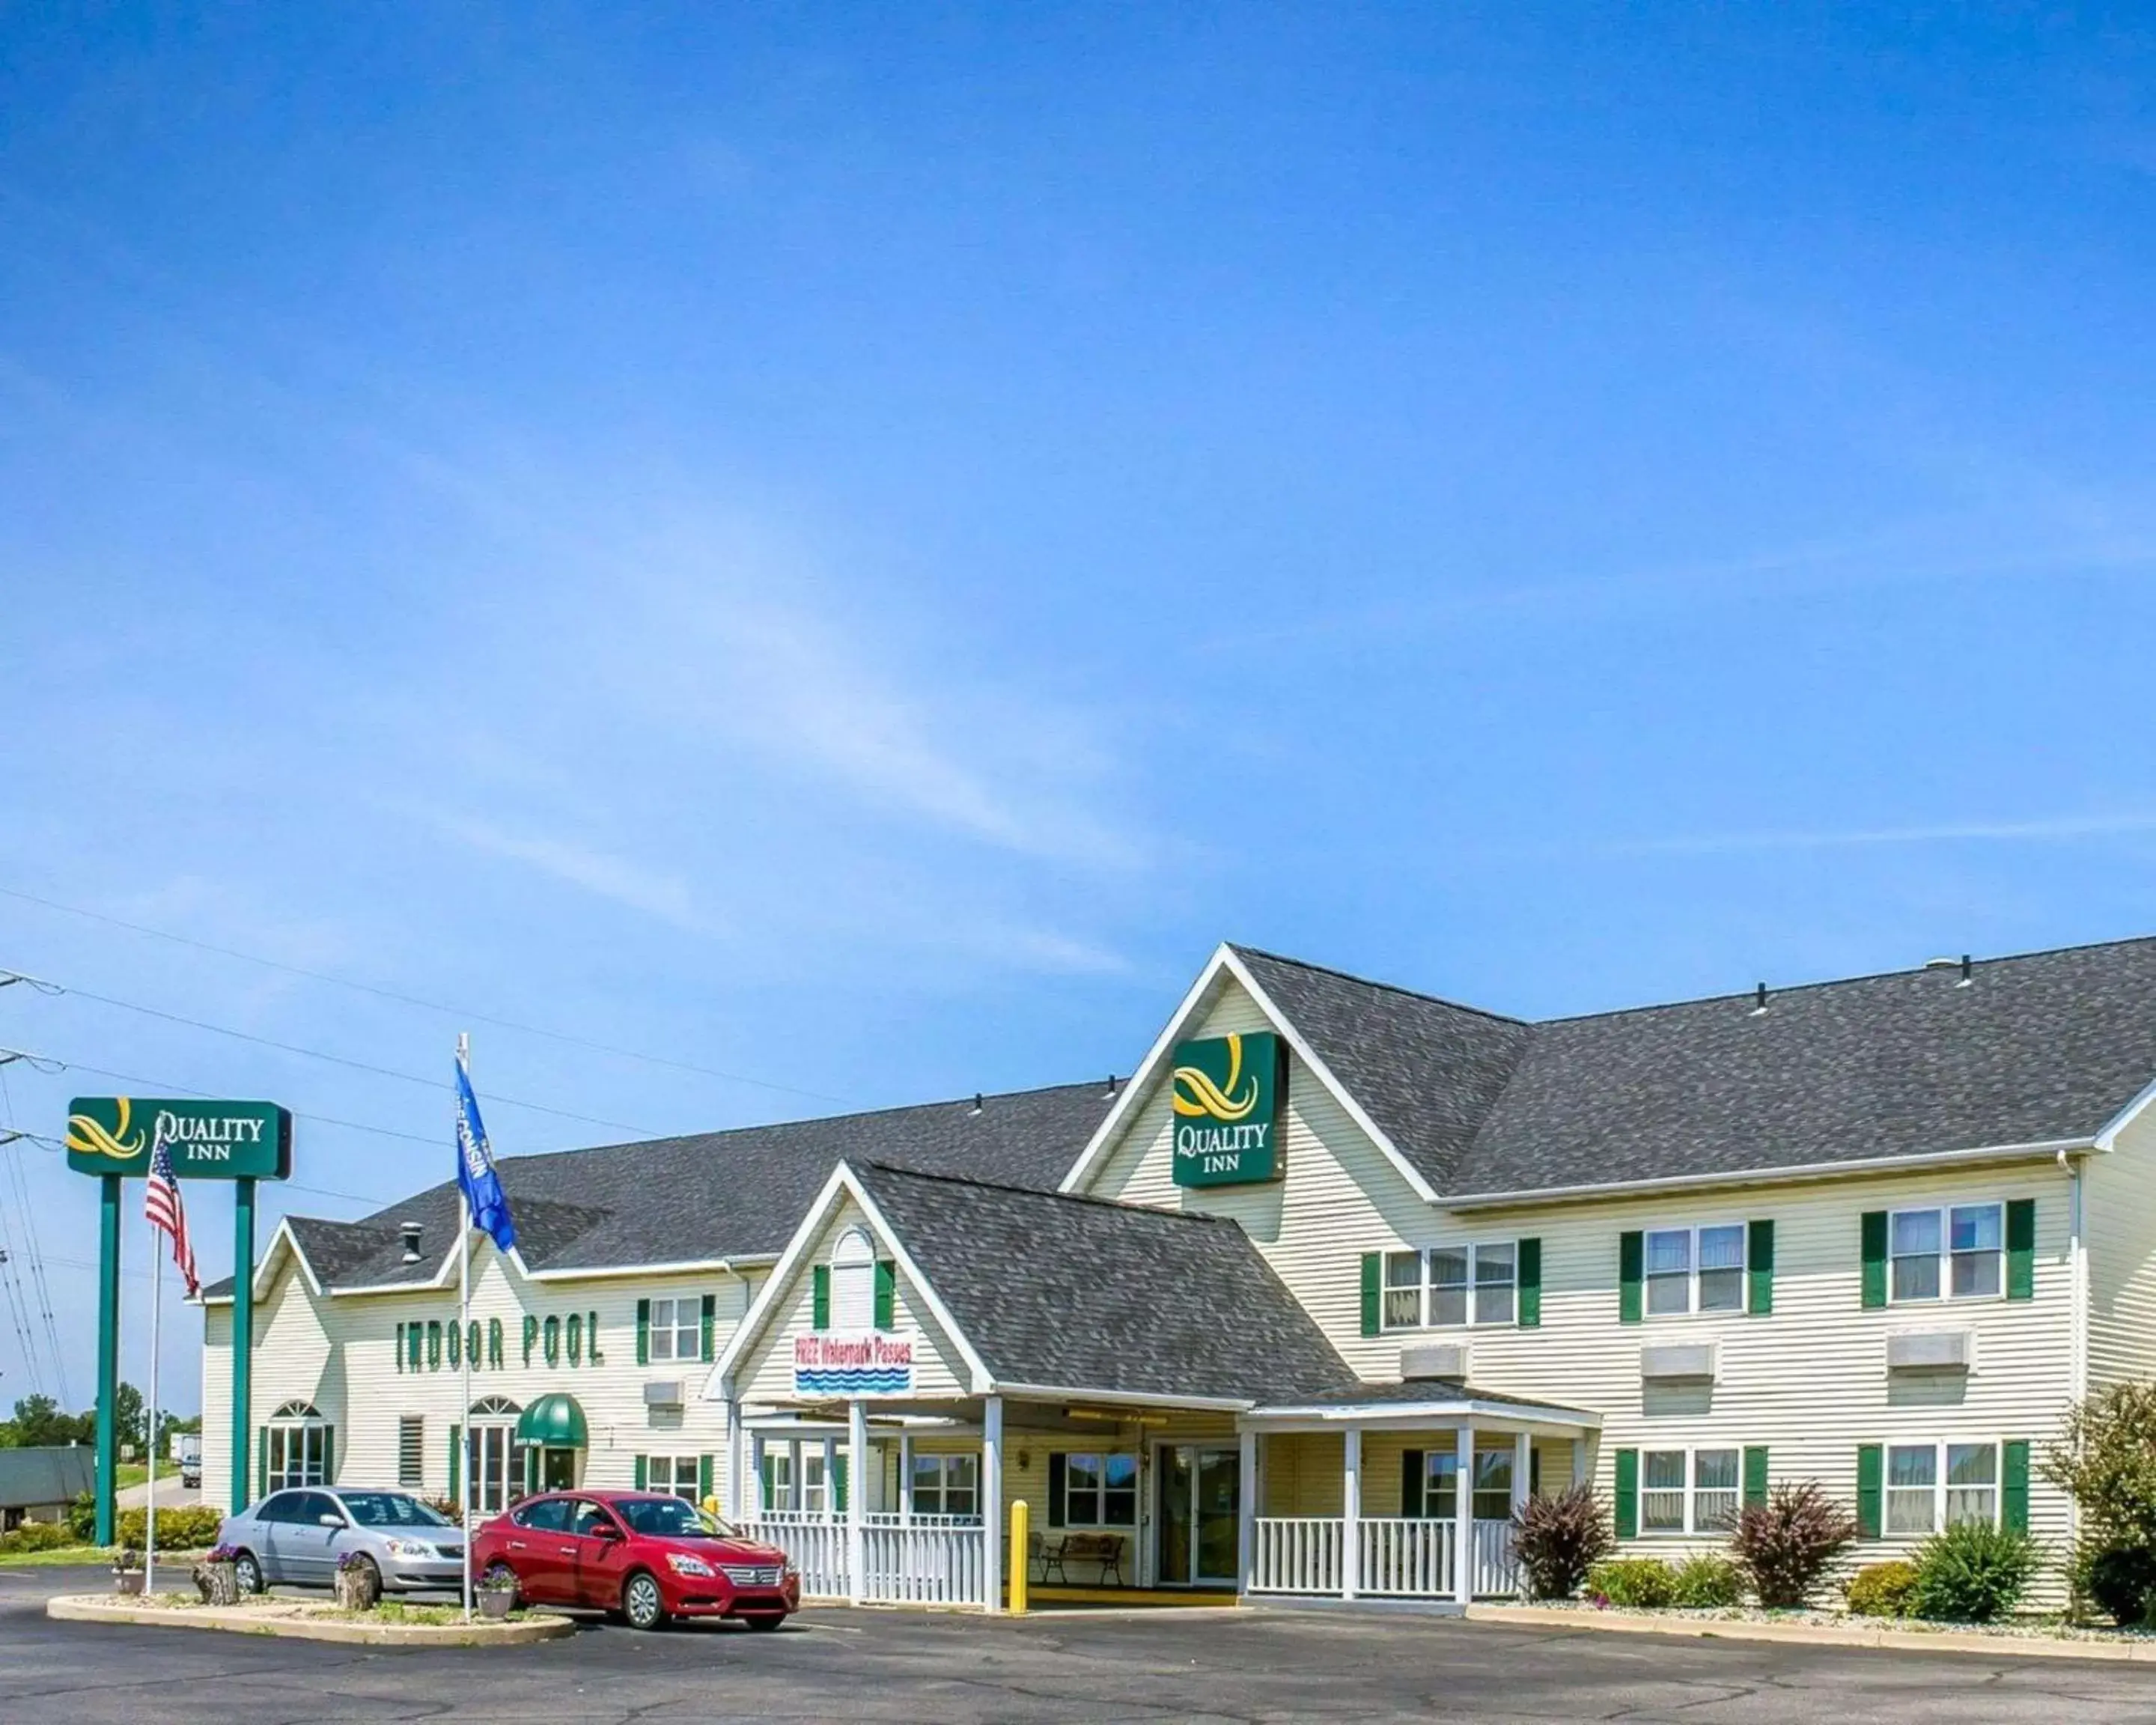 Property Building in Quality Inn Mauston